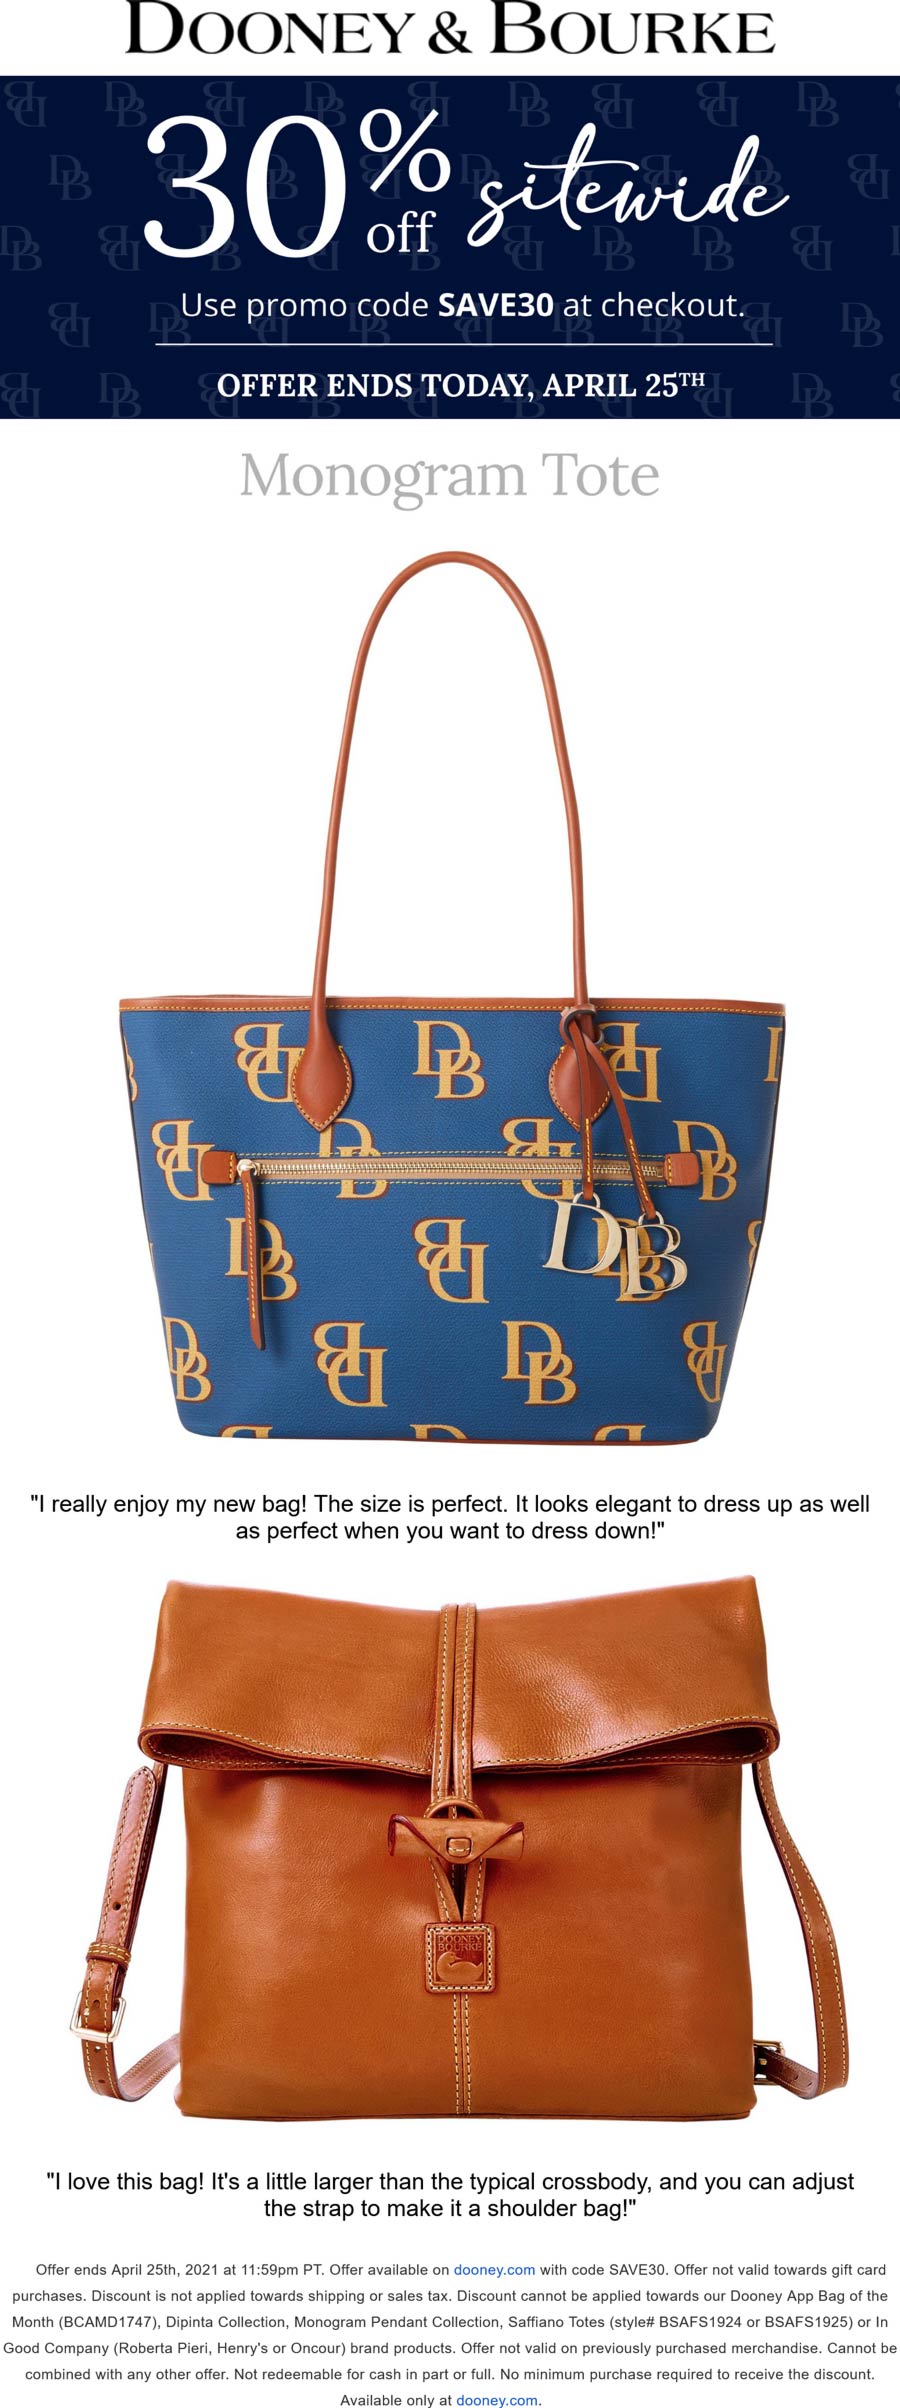 30 off everything online today at Dooney & Bourke via promo code